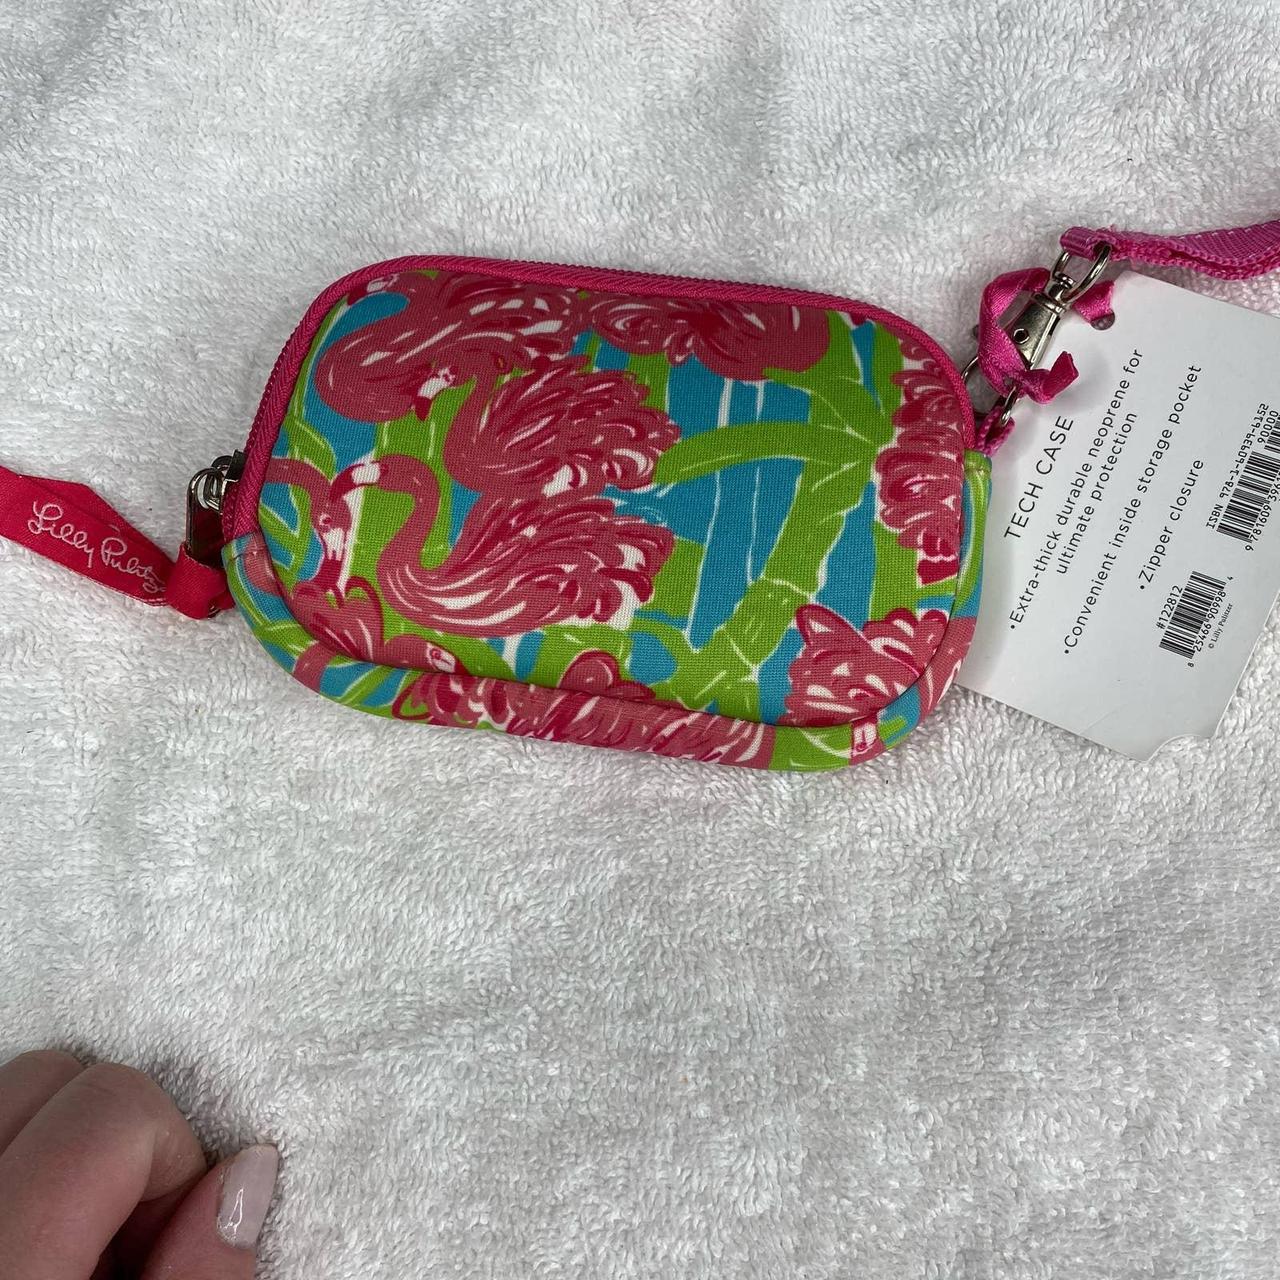 Lilly Pulitzer Women's Pink and Green Bag (4)